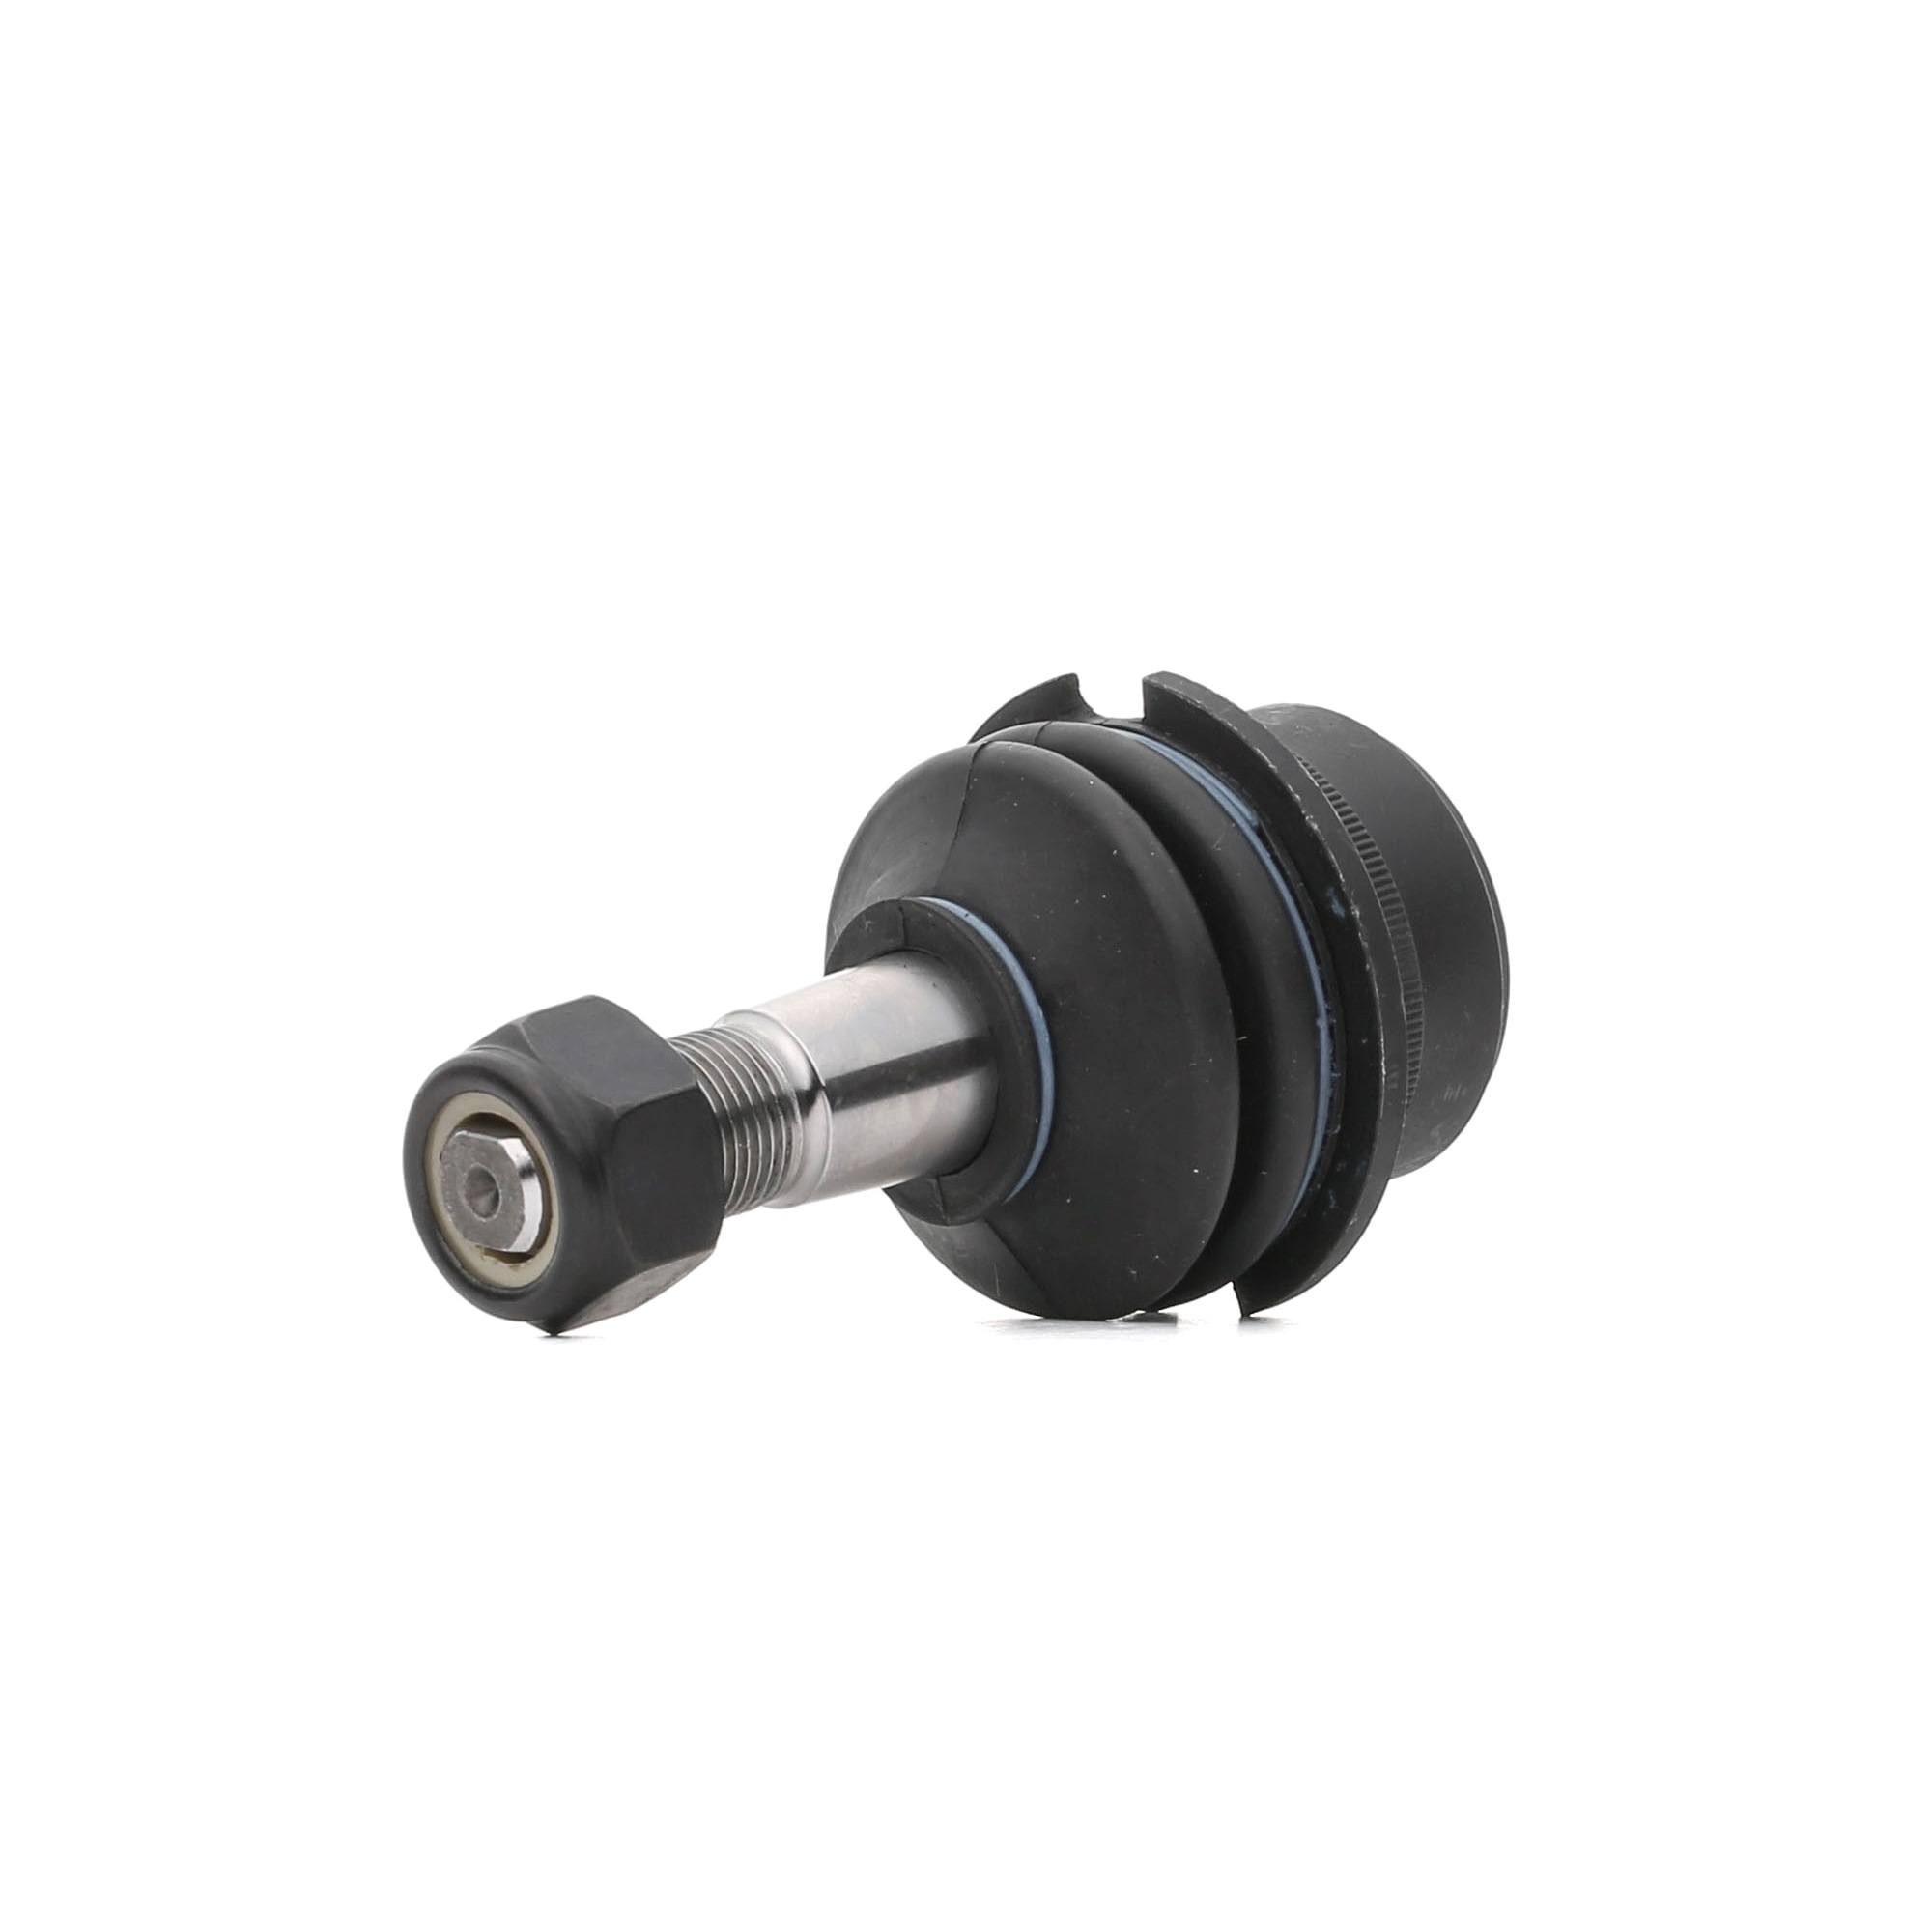 RIDEX Front axle both sides, 19,5mm, 48,3mm, 1/10 Cone Size: 19,5mm, Thread Size: M18X1.5 Suspension ball joint 2462S0218 buy